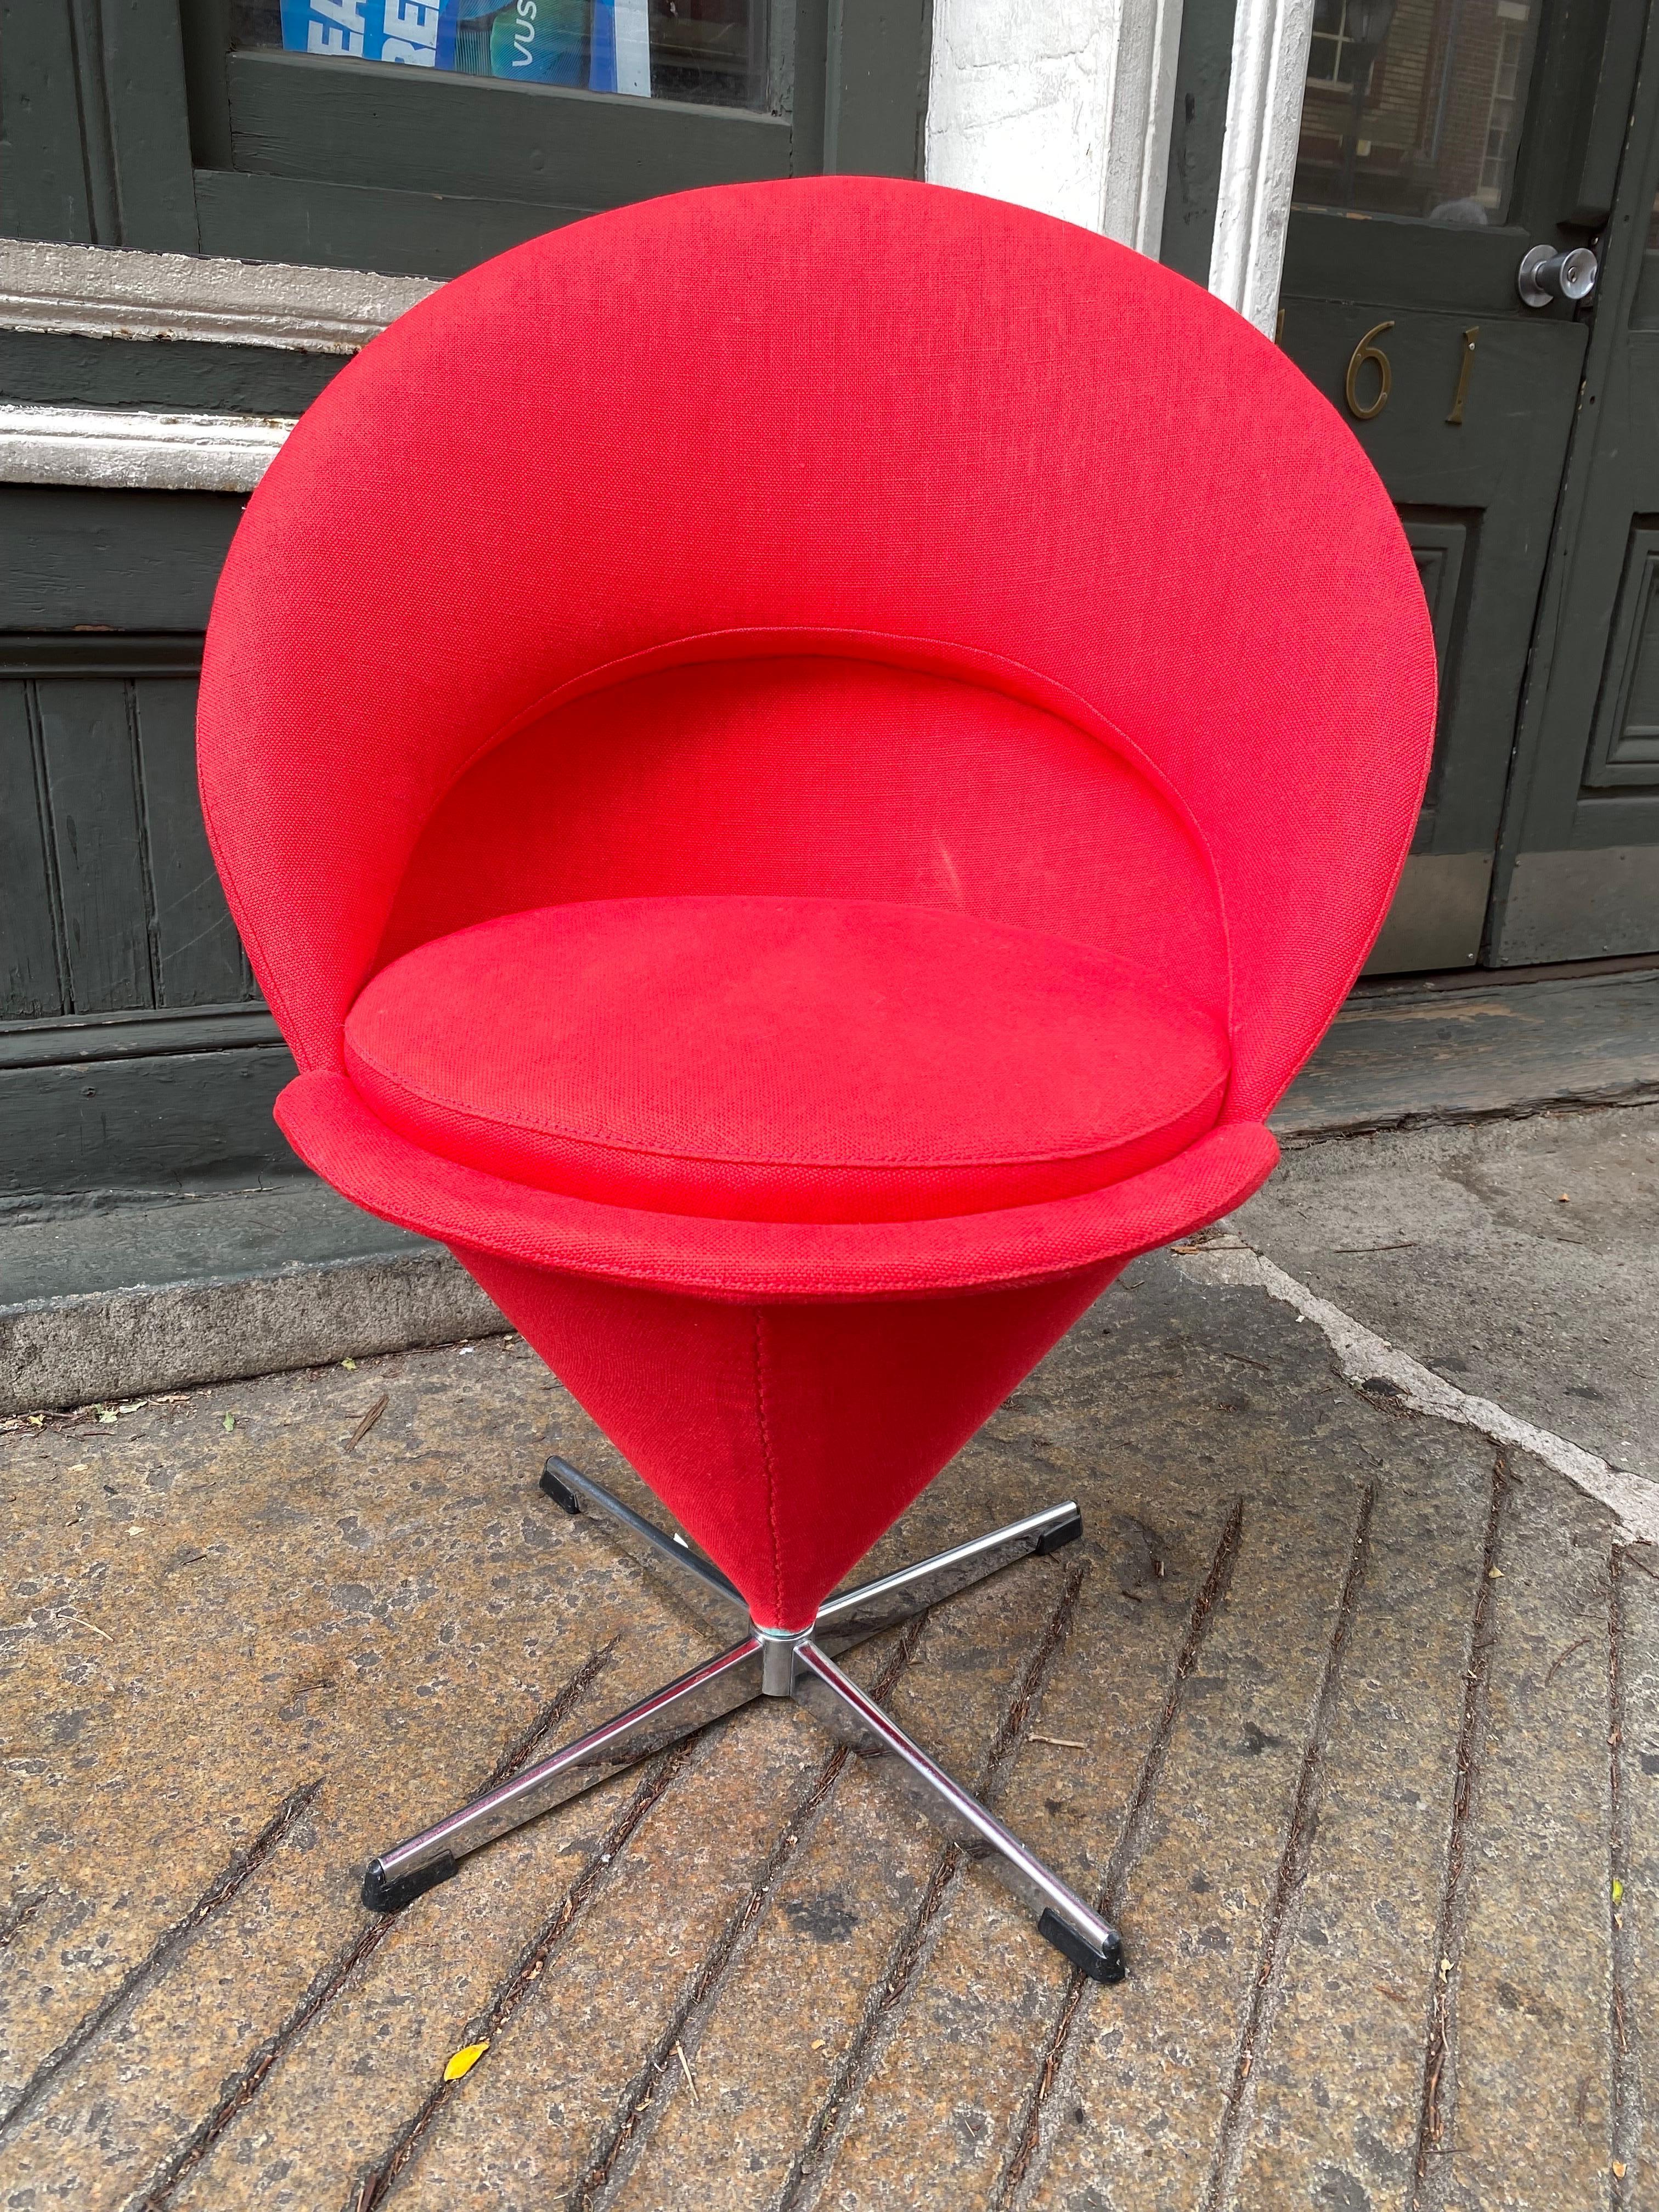 Newly reupholstered Cone Chair by Verner Panton. Great statement piece! Perfect to use at a desk or accent chair anywhere! Classic Panton Design!